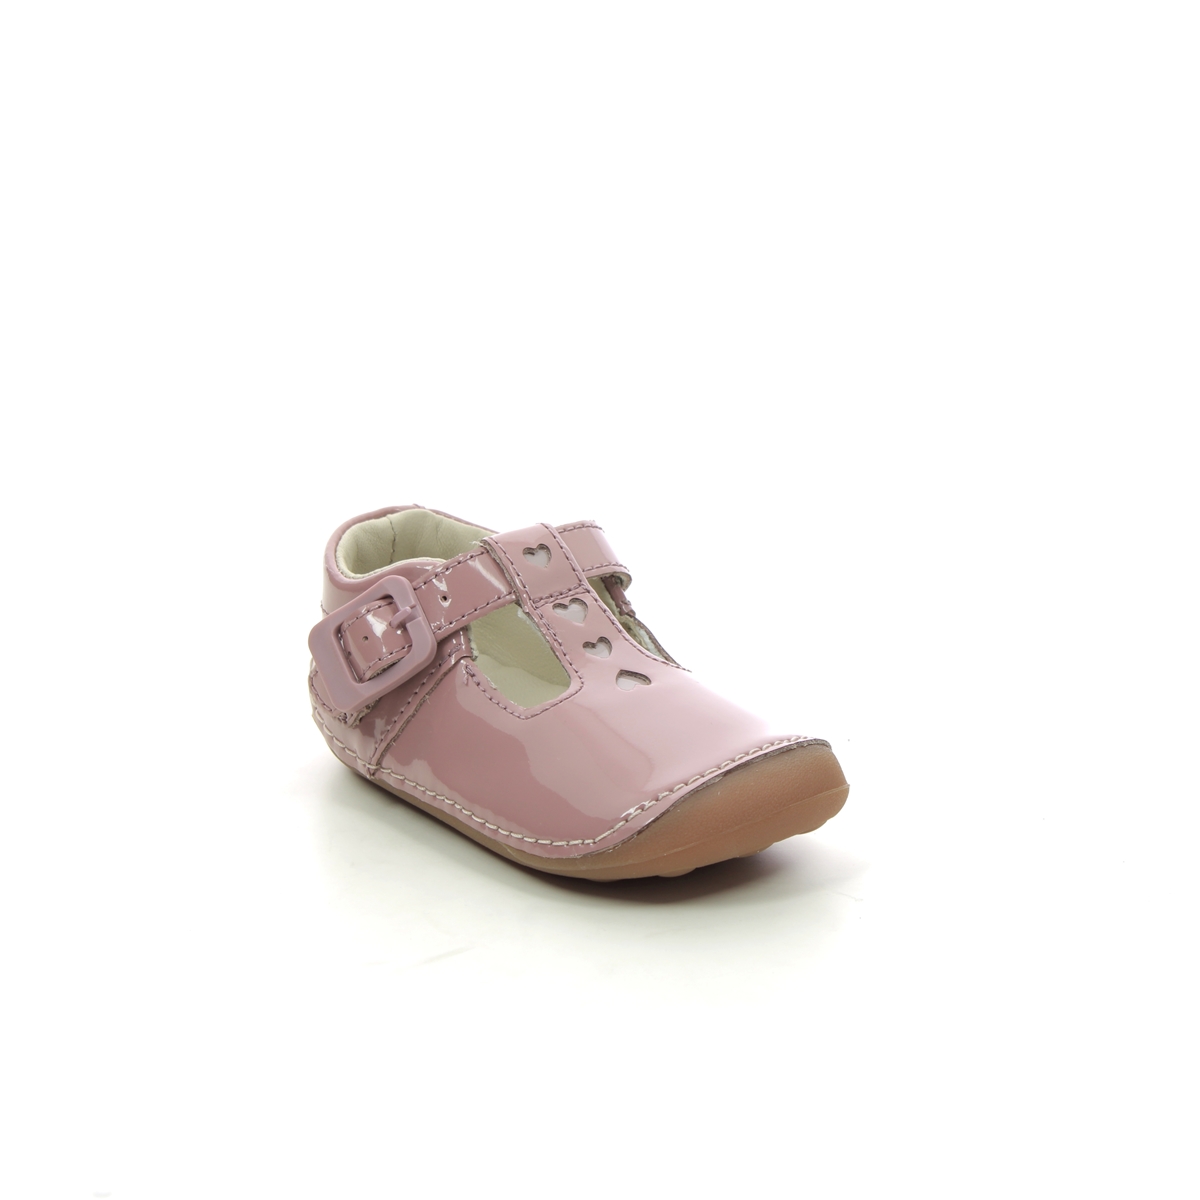 Clarks Tiny Beat T Pink Kids Girls First And Baby Shoes 694087G In Size 5 In Plain Pink G Width Fitting For kids